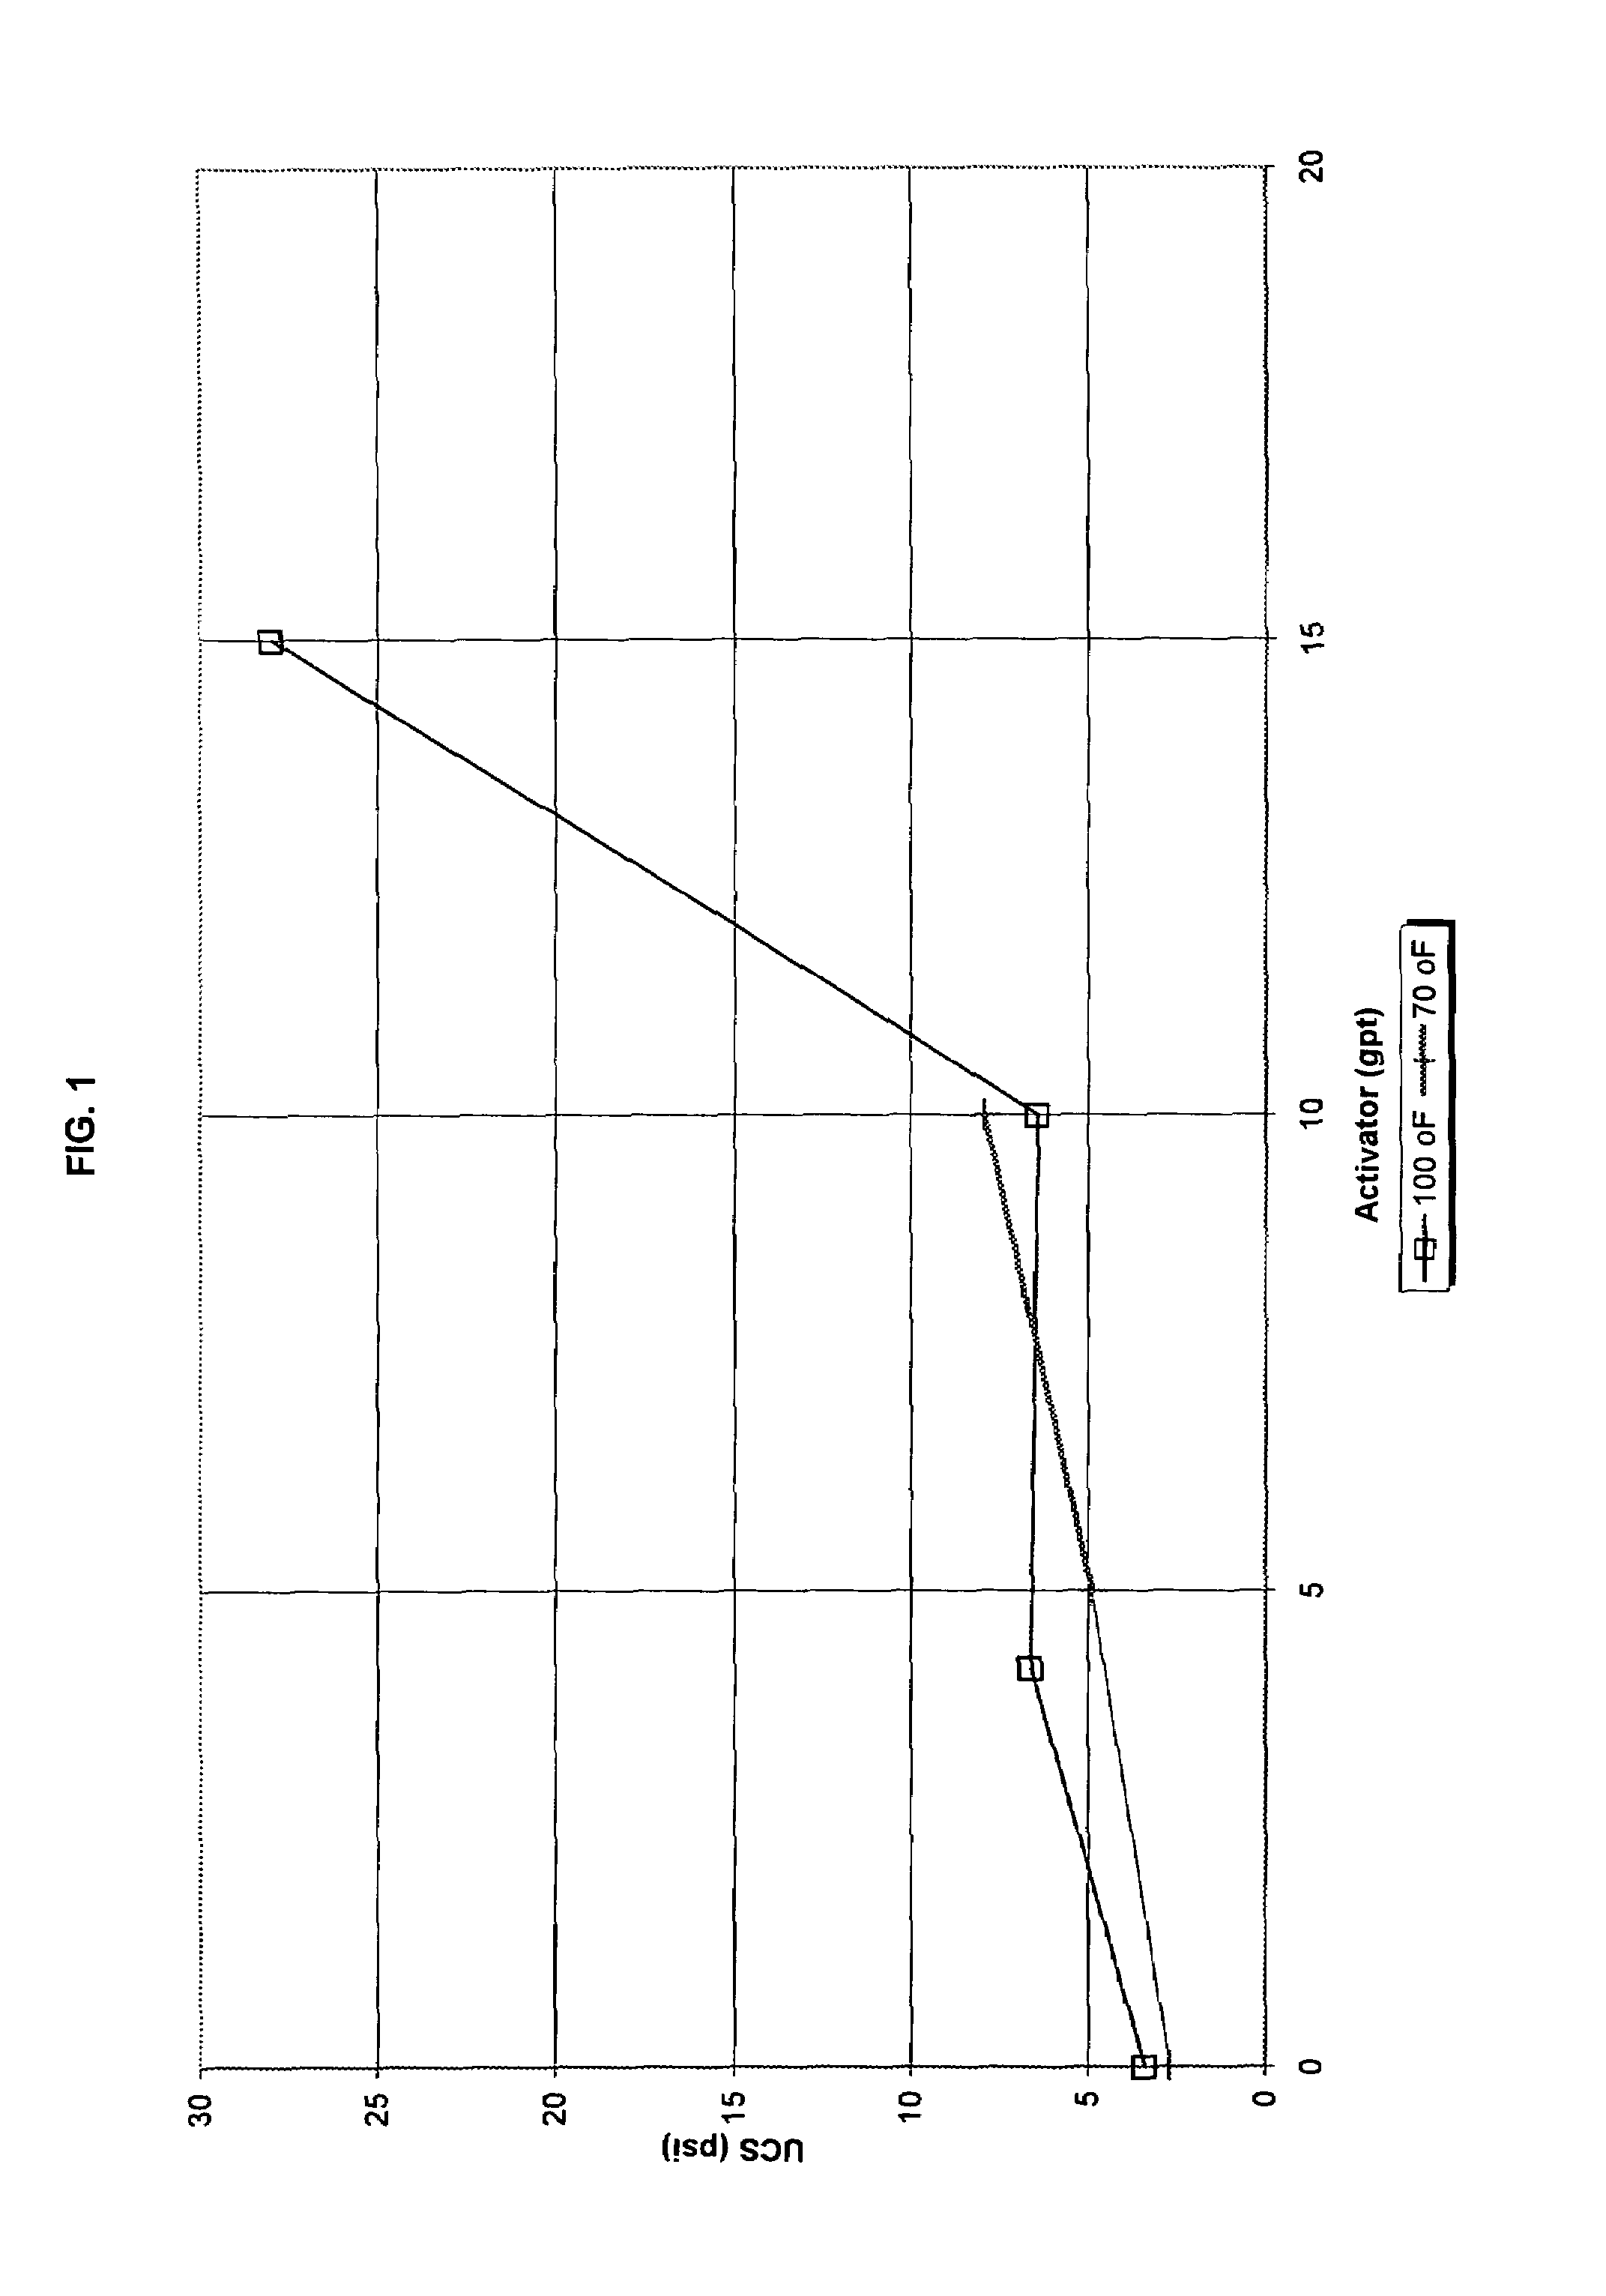 Coated plastic beads and methods of using same to treat a wellbore or subterranean formation